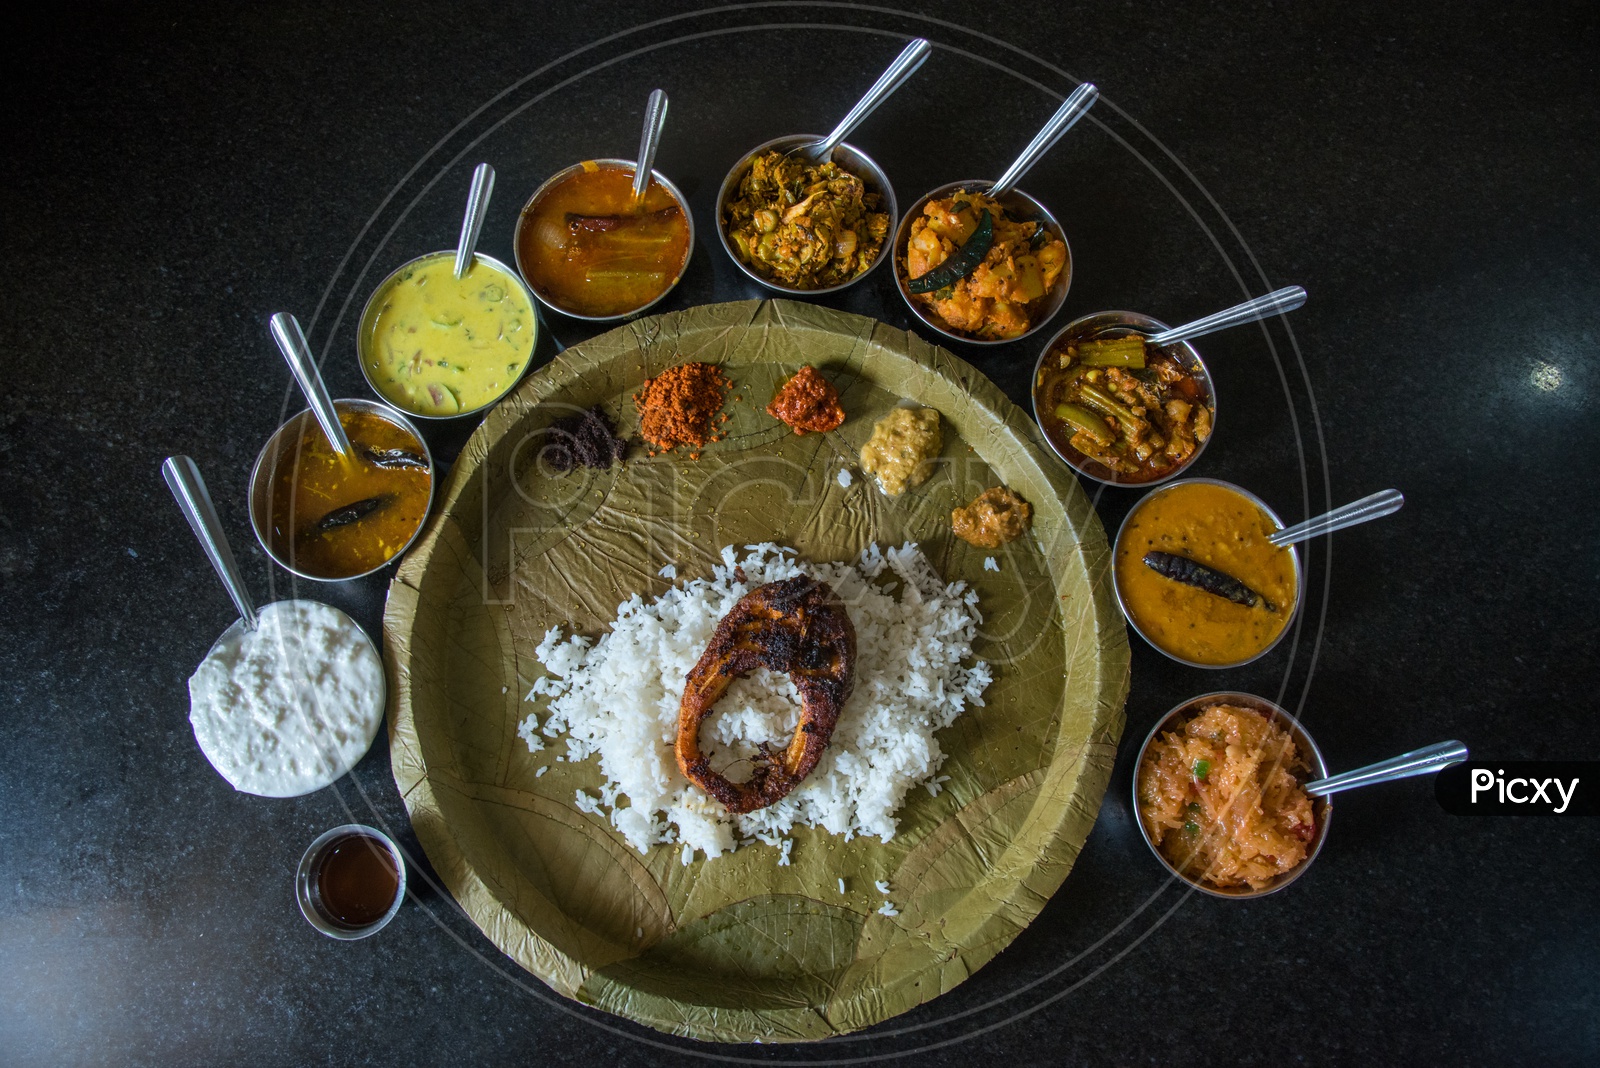 South Indian Meal with Fish